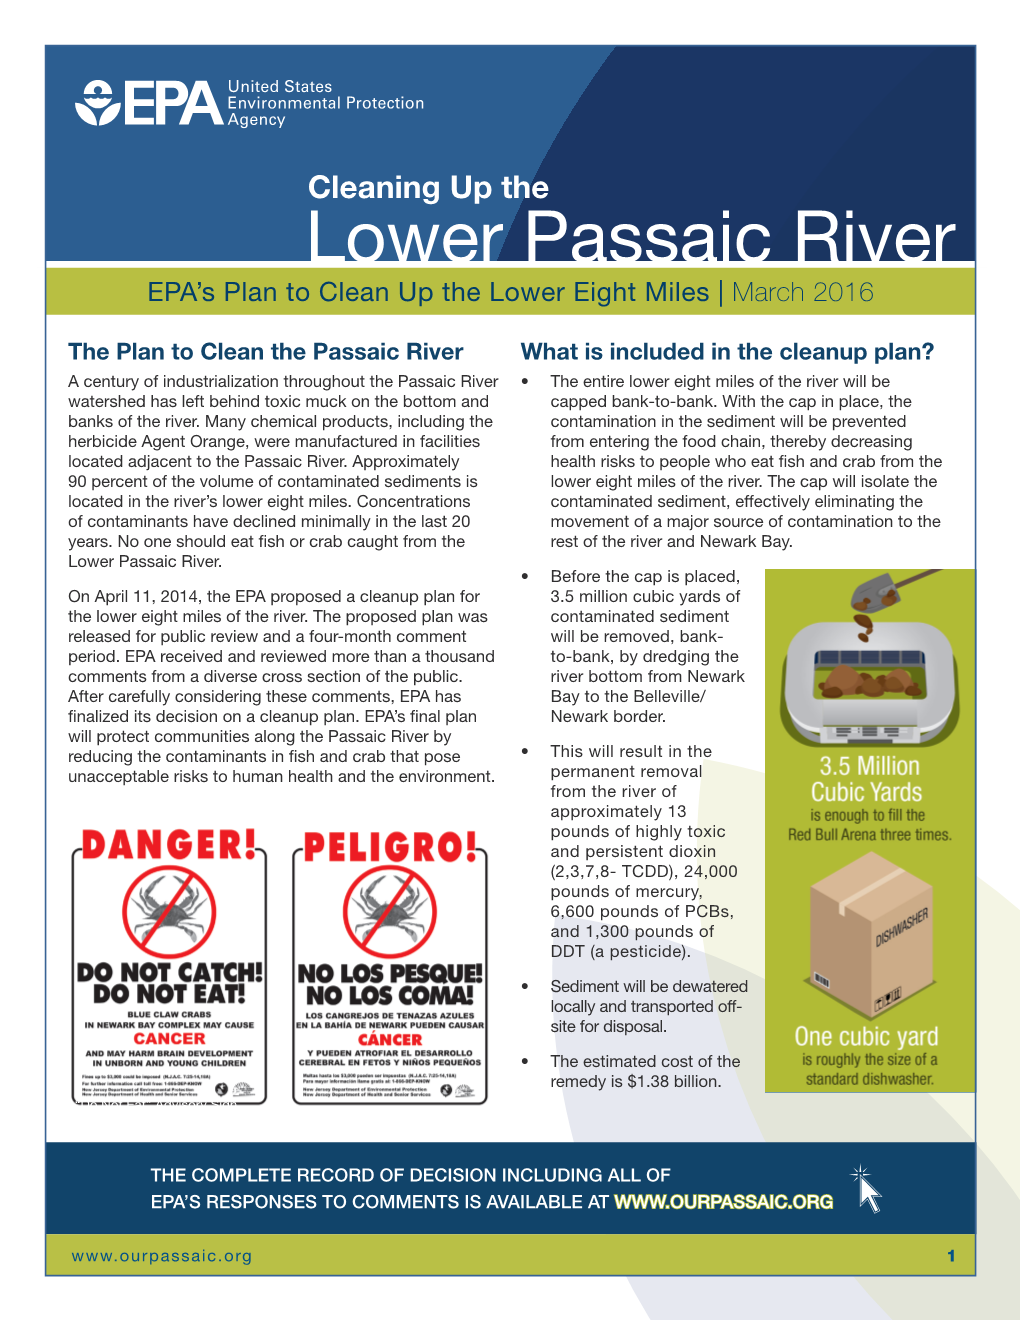 Lower Passaic River EPA’S Plan to Clean up the Lower Eight Miles | March 2016